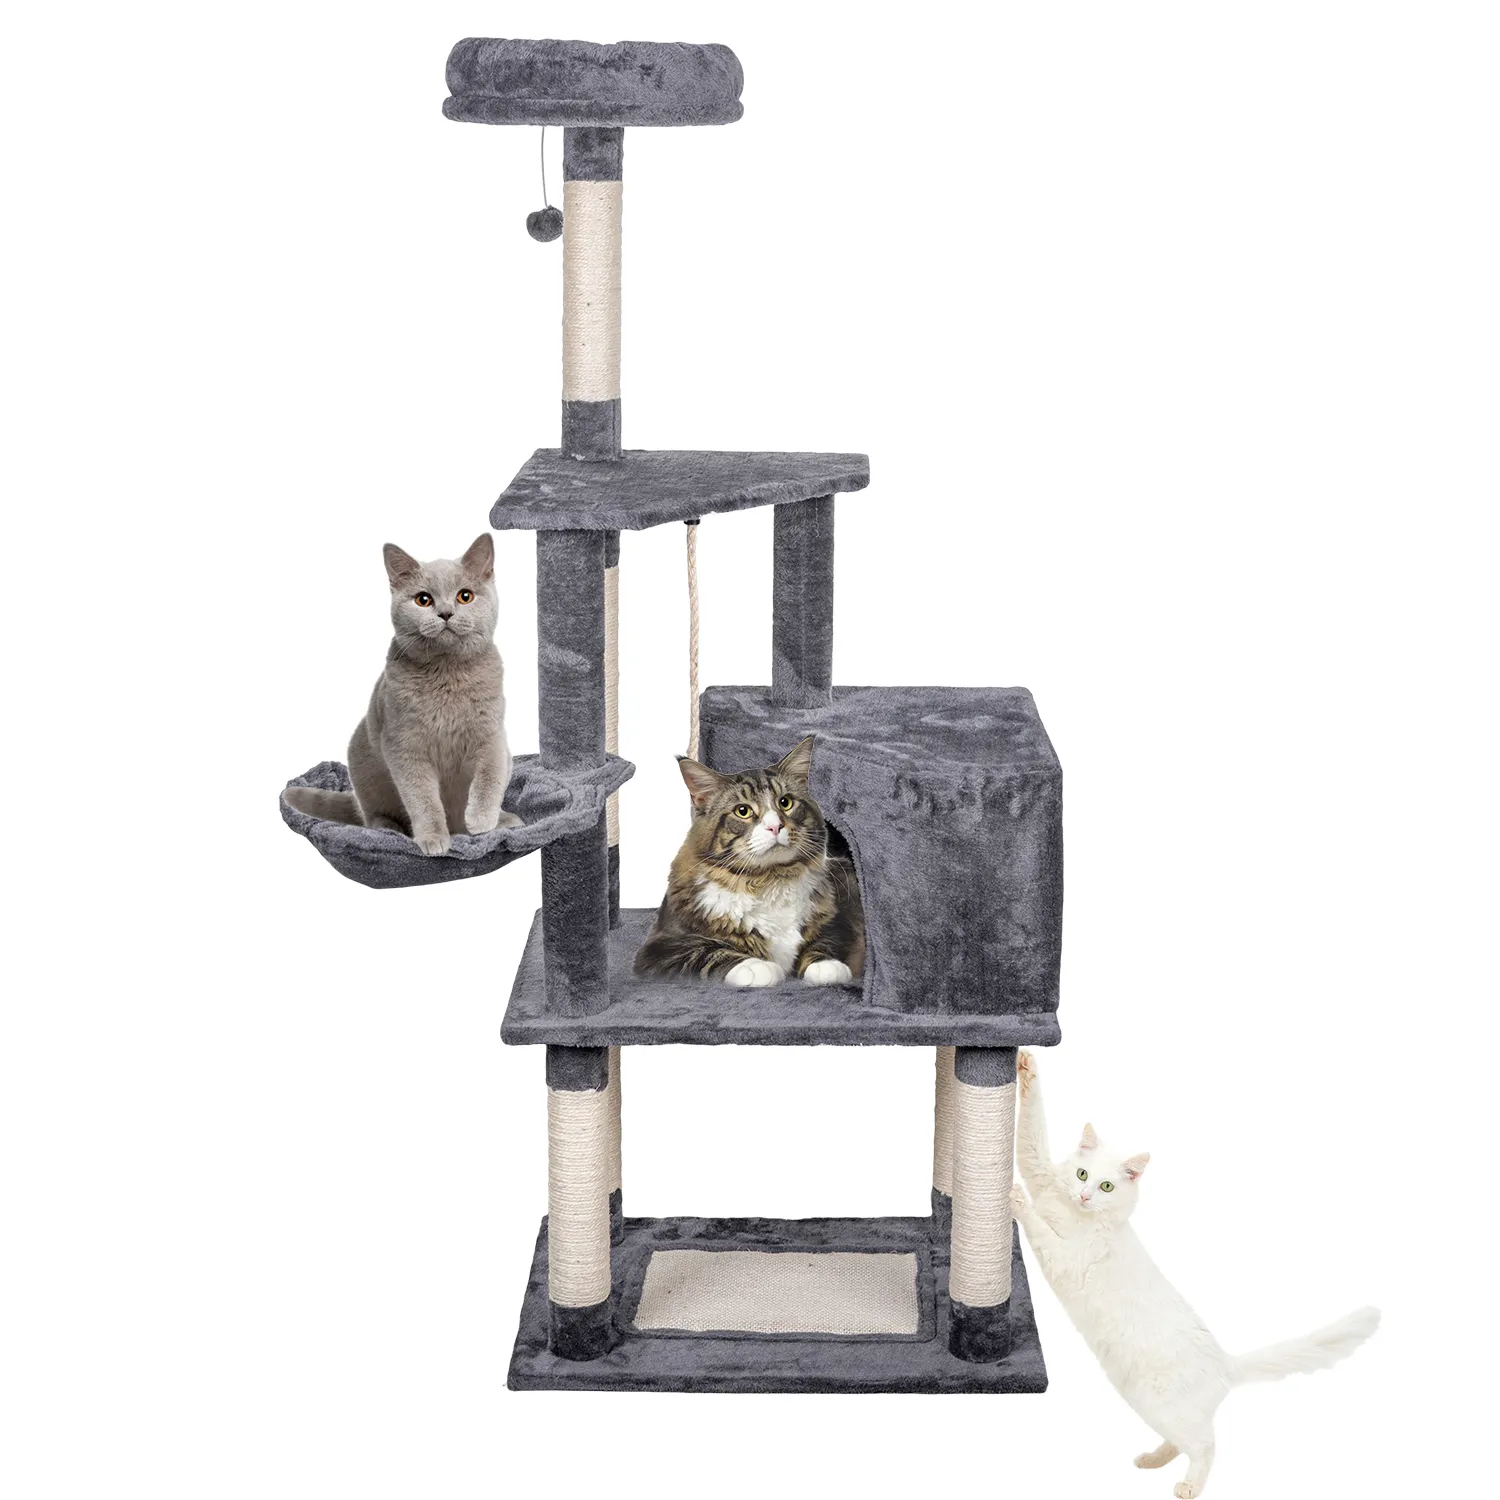 Wholesale Amazon hot selling large size wooden pet scratcher house tower condo cat tree